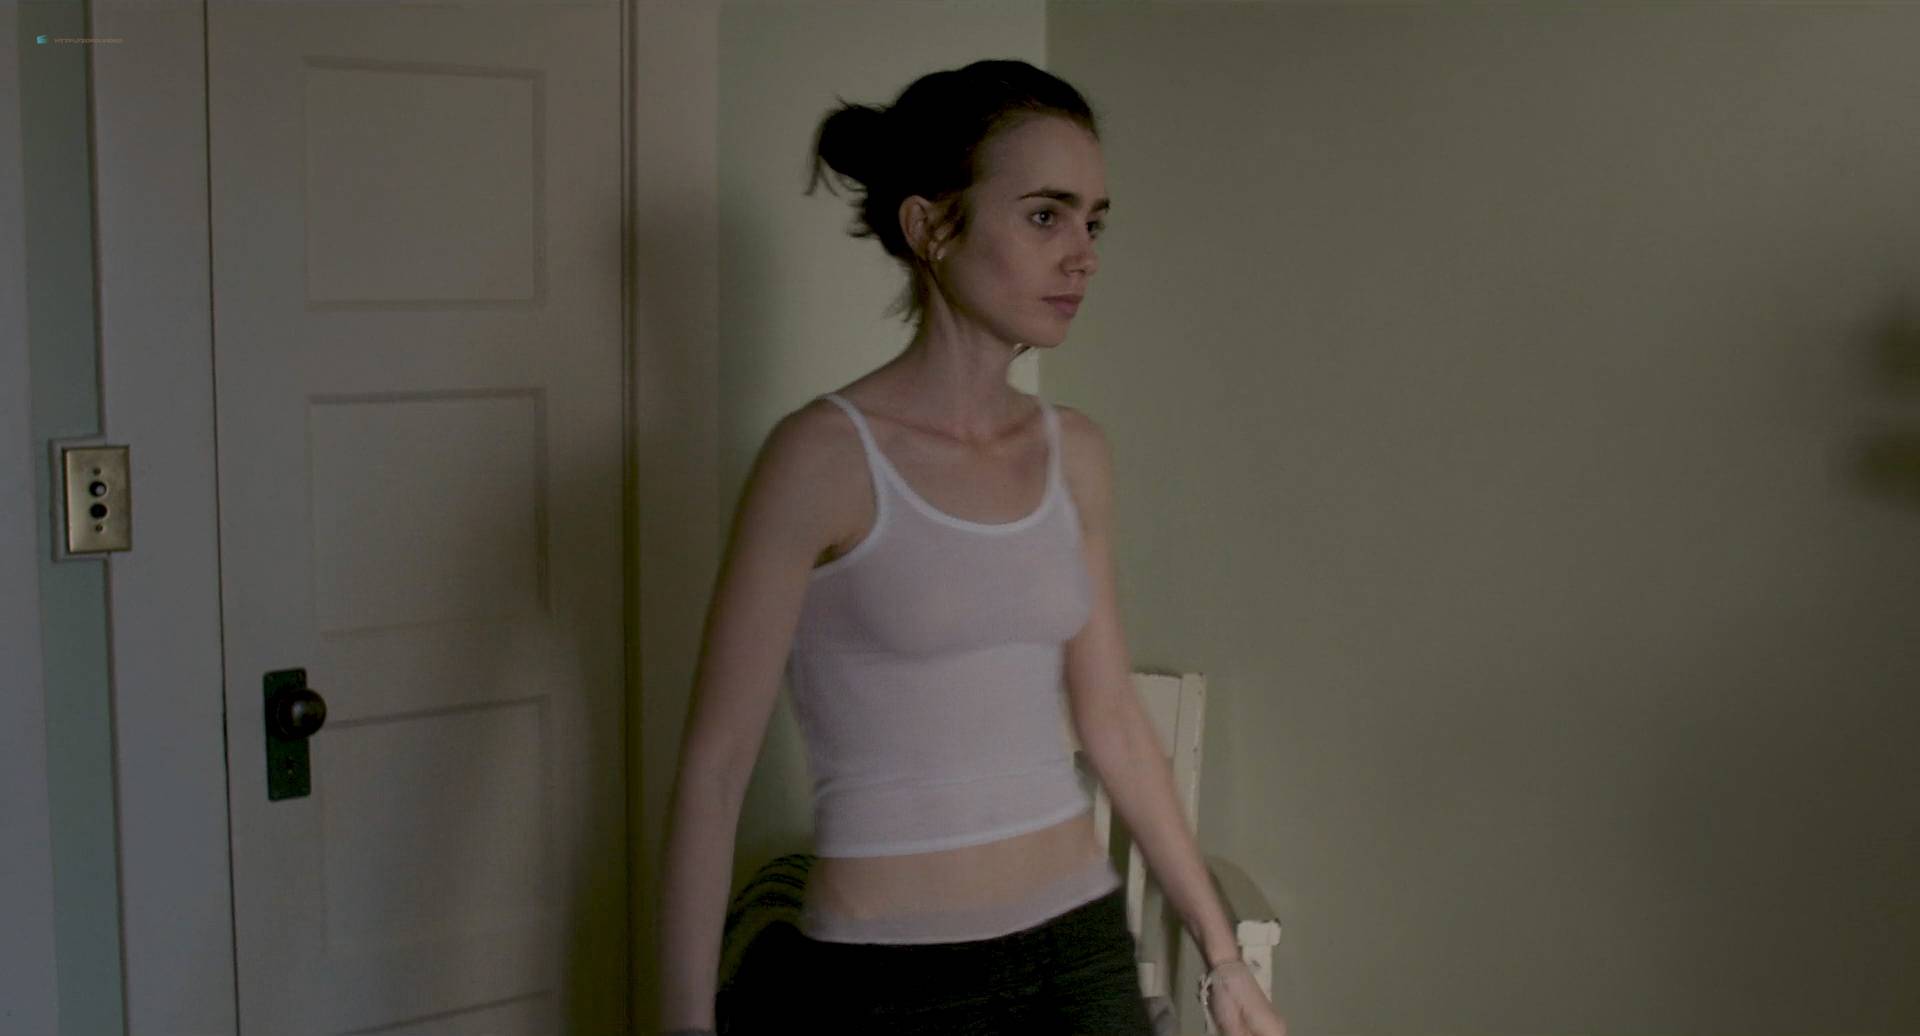 Lily collins nude picture